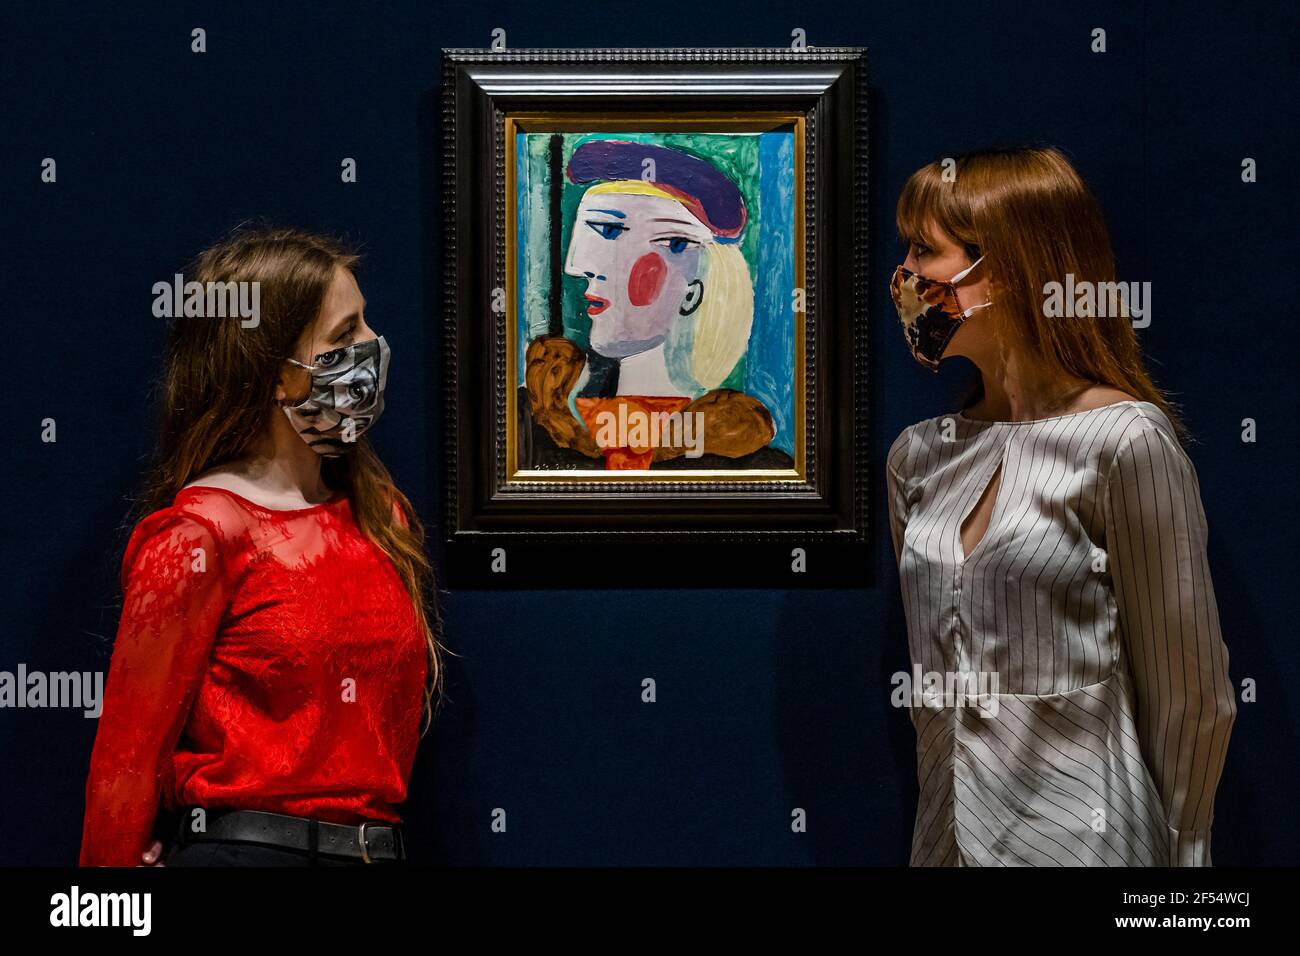 London, UK. 24th Mar, 2021. Femme au Béret Mauve, 1937 by Pablo Picasso. Estimate: $10,000,000-15,000,000 - the portrait, unseen for nearly 40 years, is being shown in cities around the world before being offered for sale at Bonhams Impressionist and Modern Art sale in New York on Thursday 13 May. Credit: Guy Bell/Alamy Live News Stock Photo